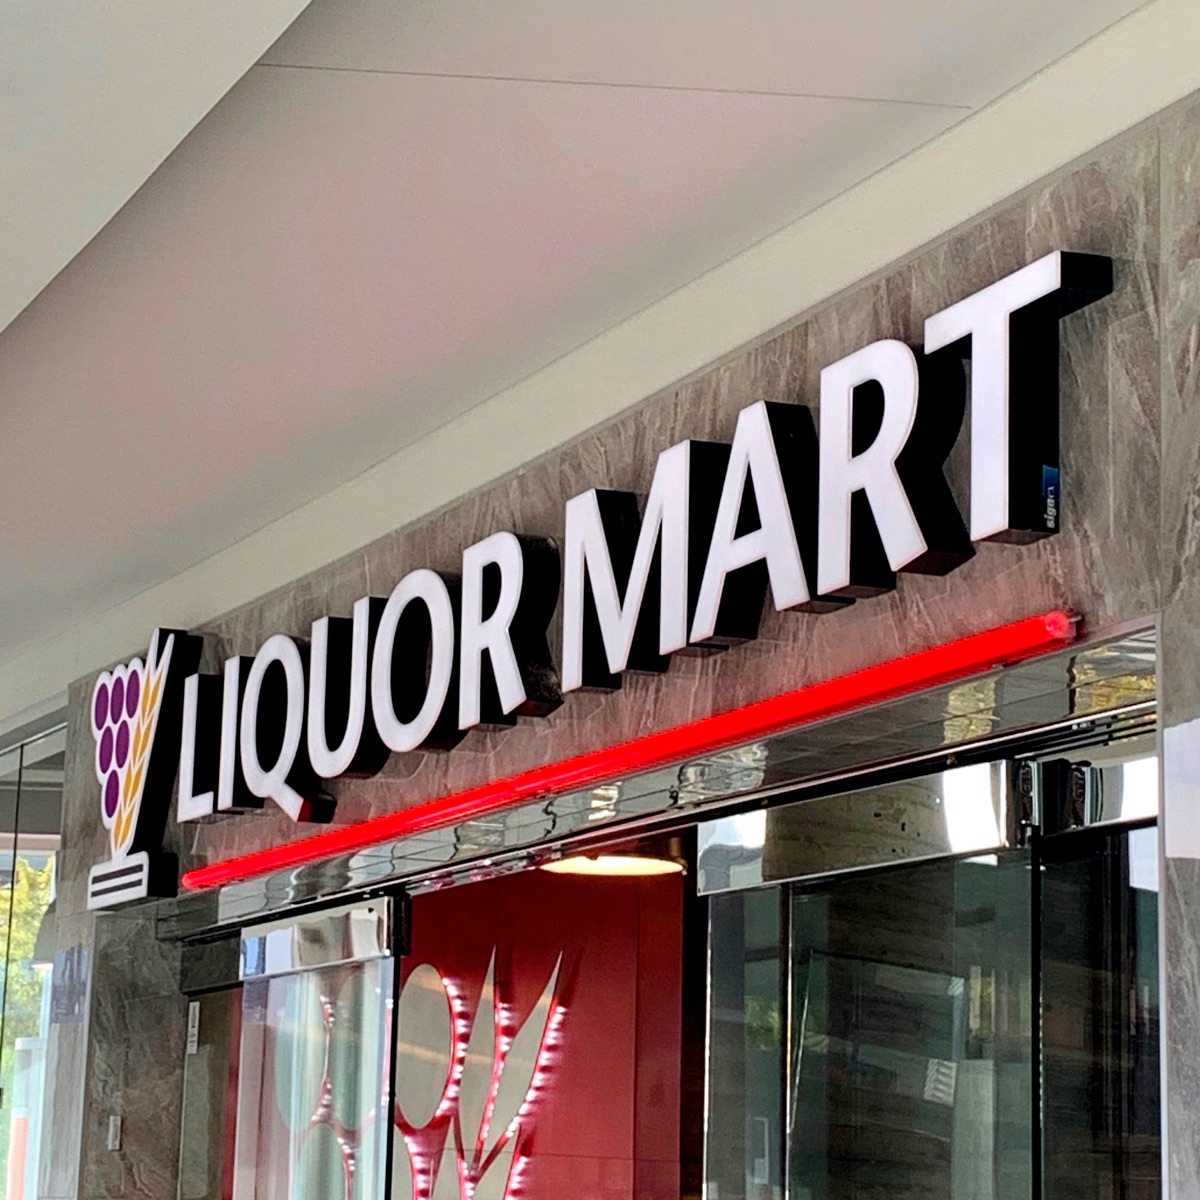 Featured image for “Liquor Mart”